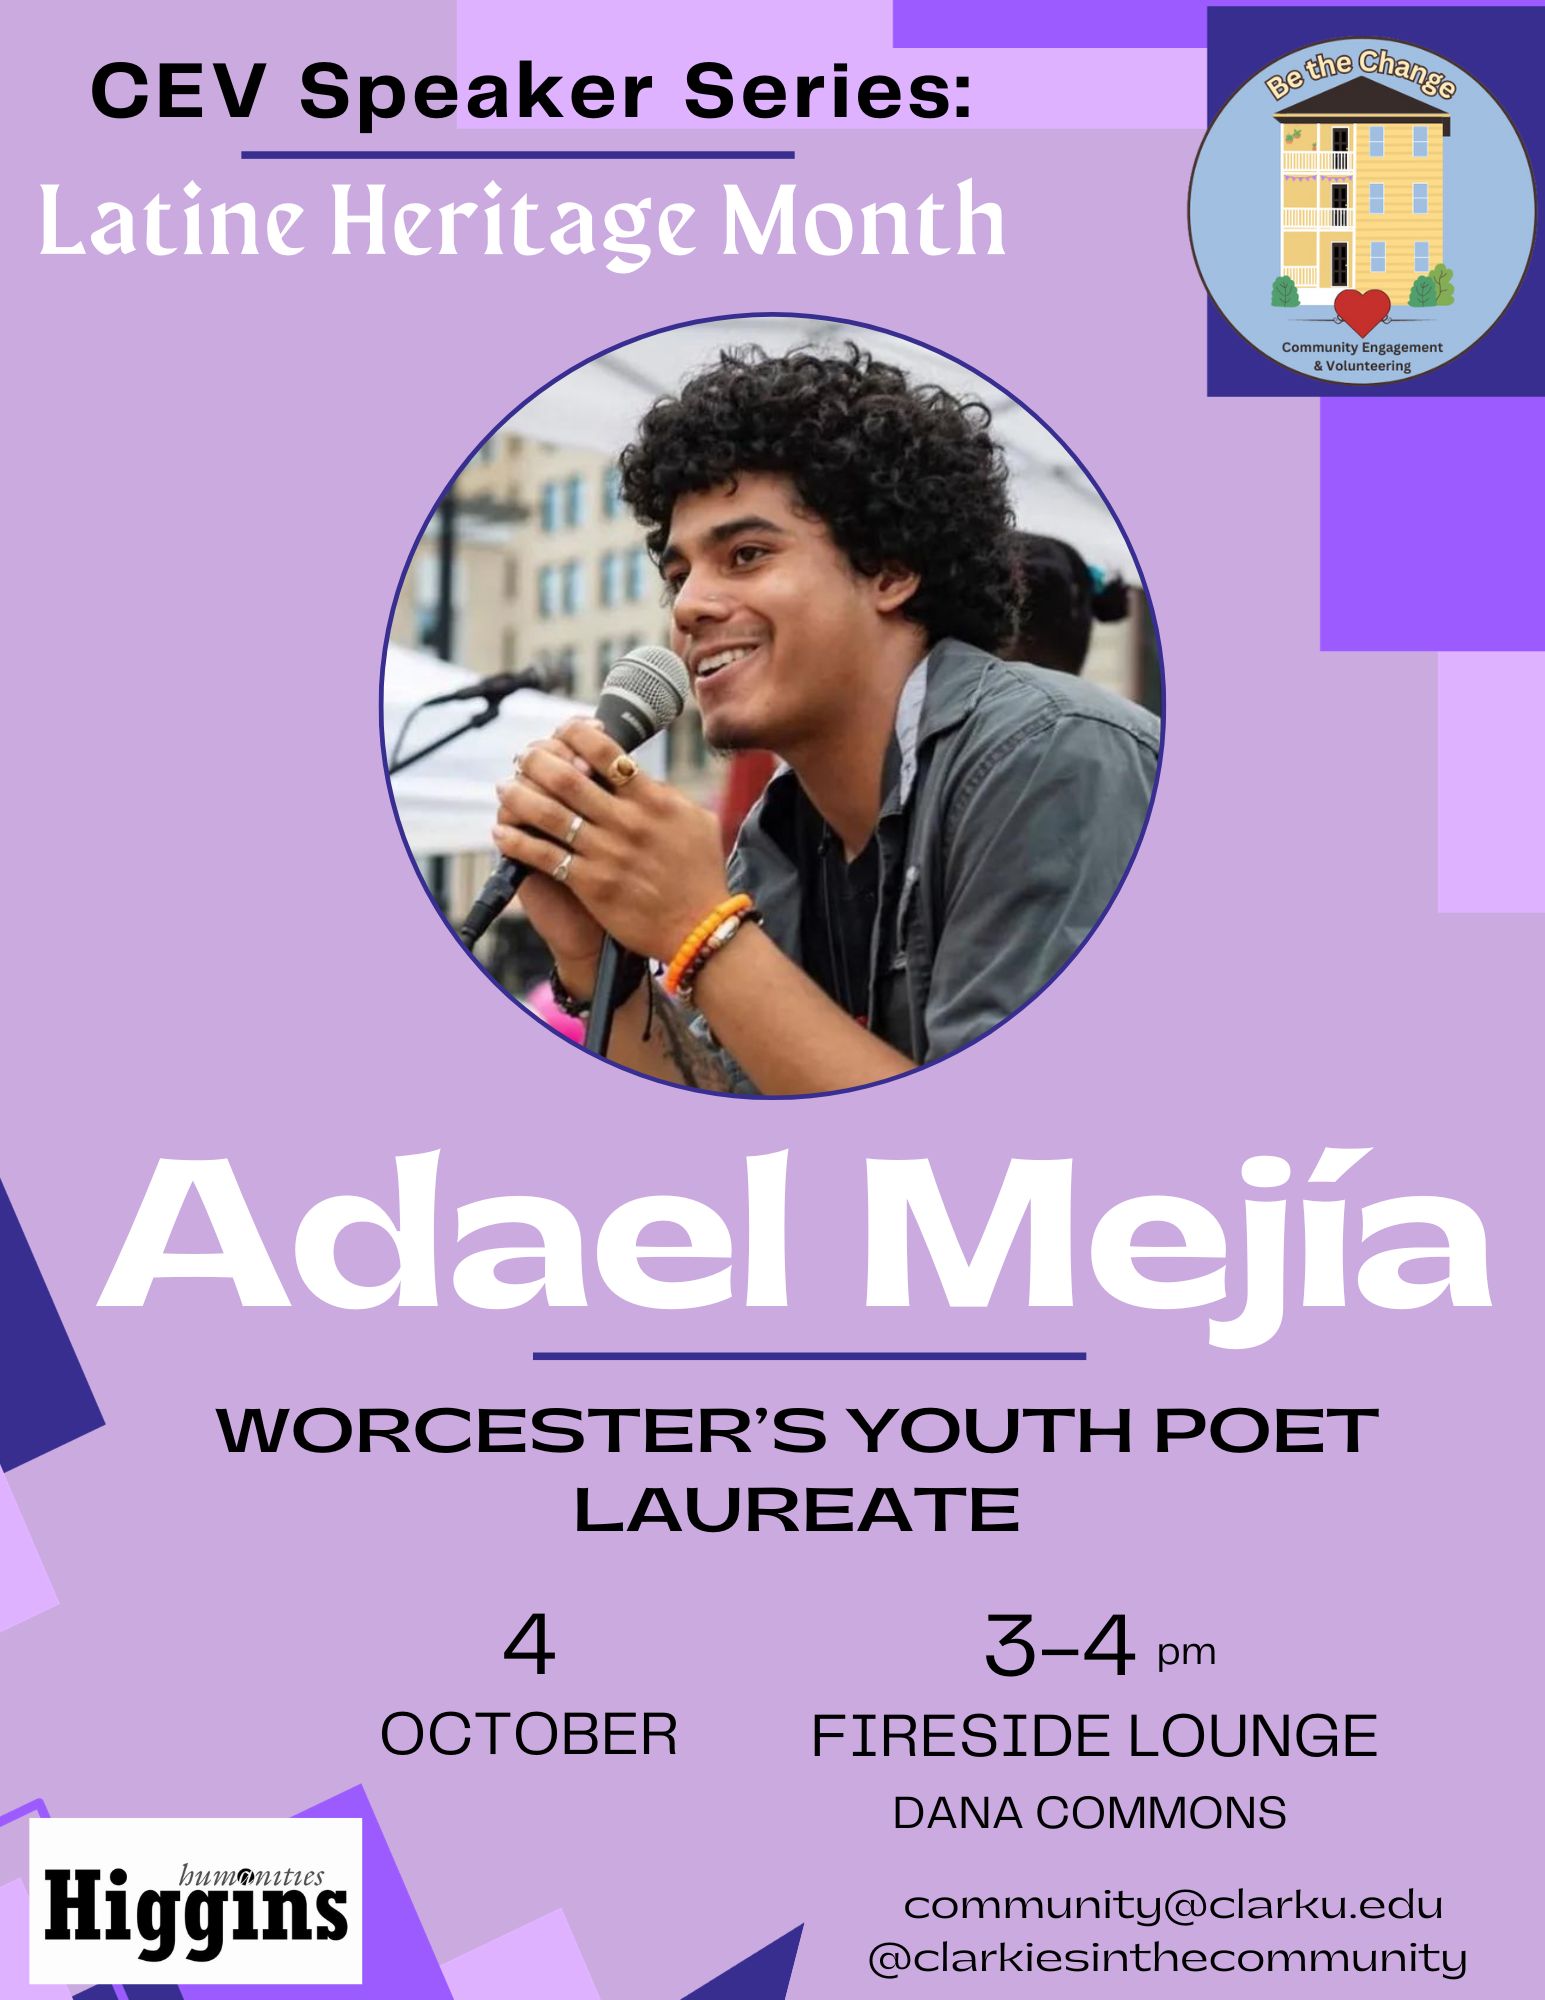 Image of Adael Mejia with event details